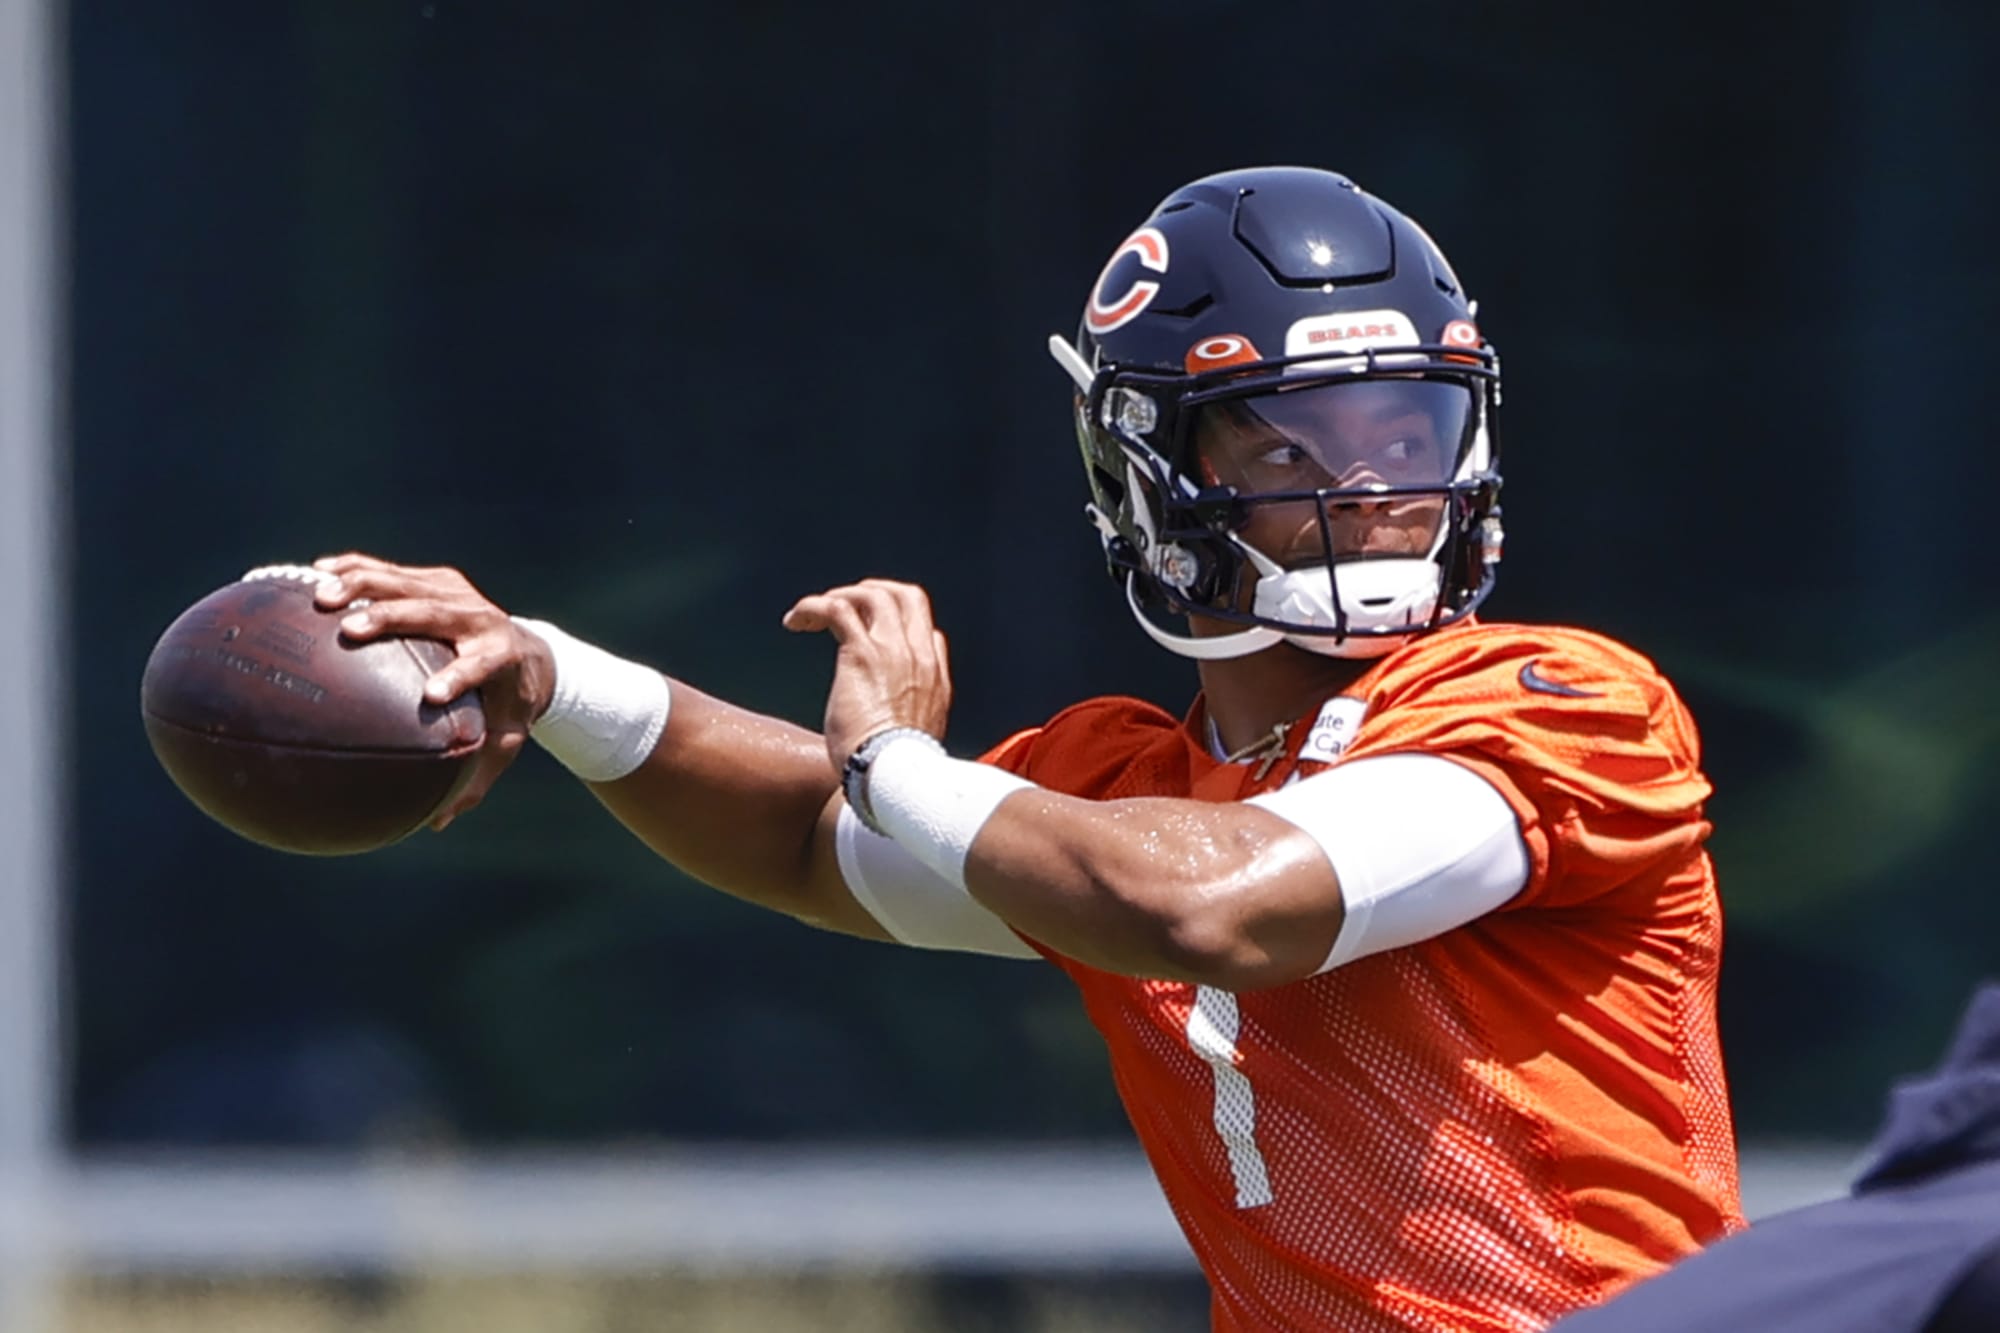 Bears' Andy Dalton: Justin Fields Will Have Great Career but Right